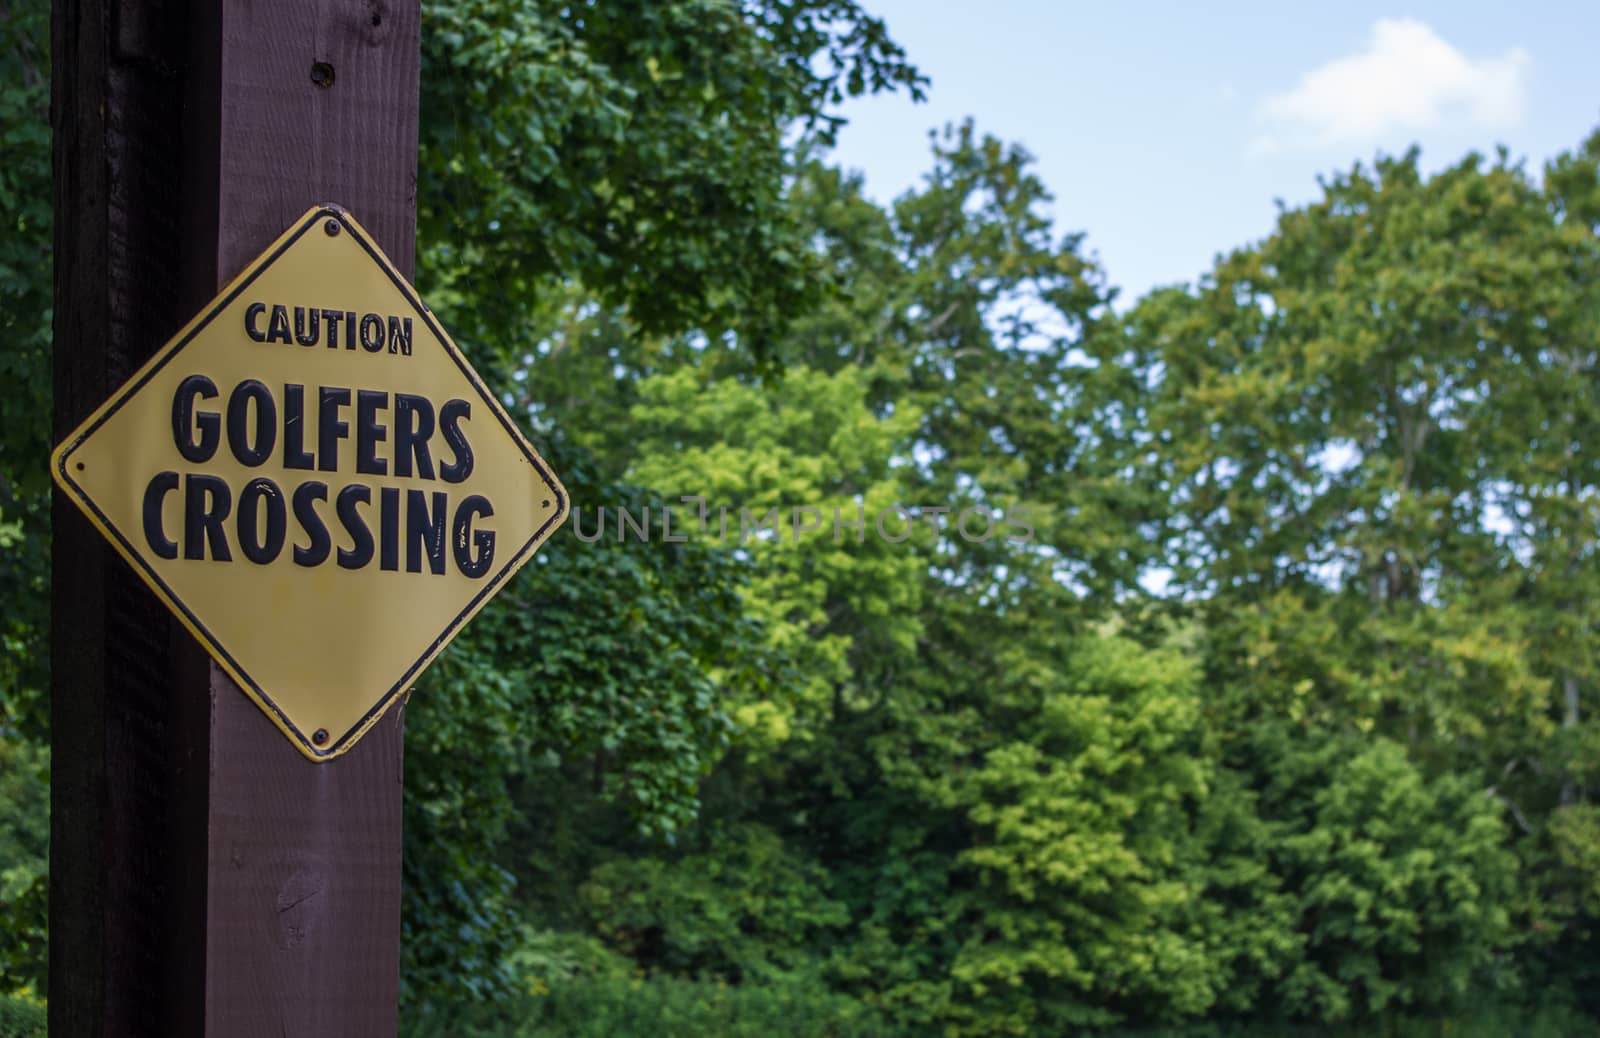 Caution Golfers Crossing Sign by krisblackphotography